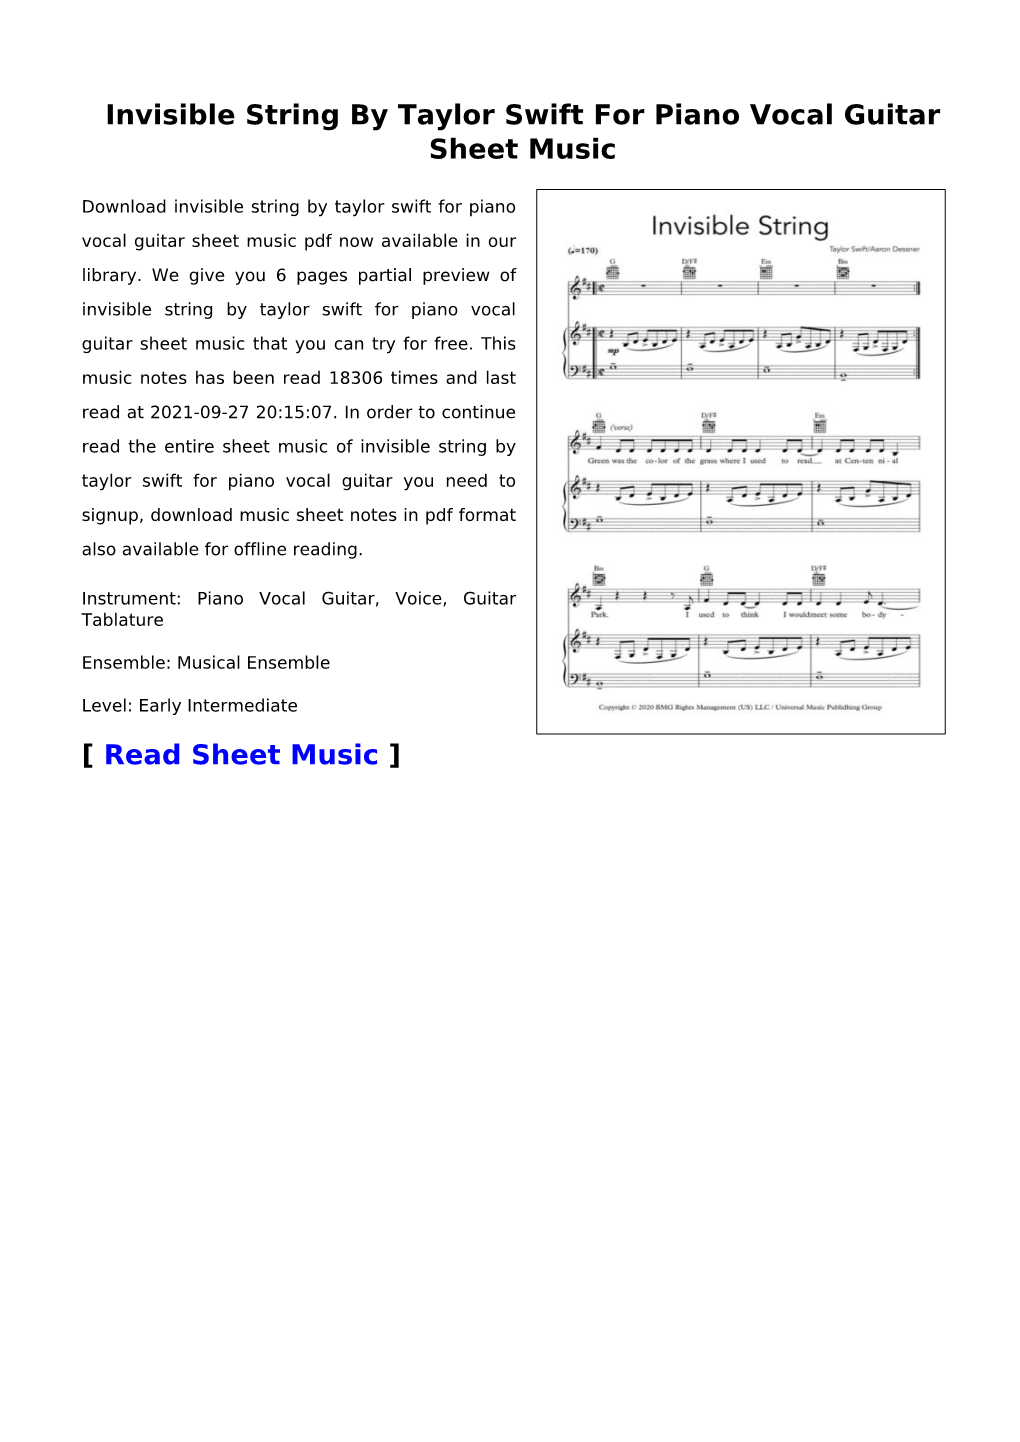 Invisible String by Taylor Swift for Piano Vocal Guitar Sheet Music